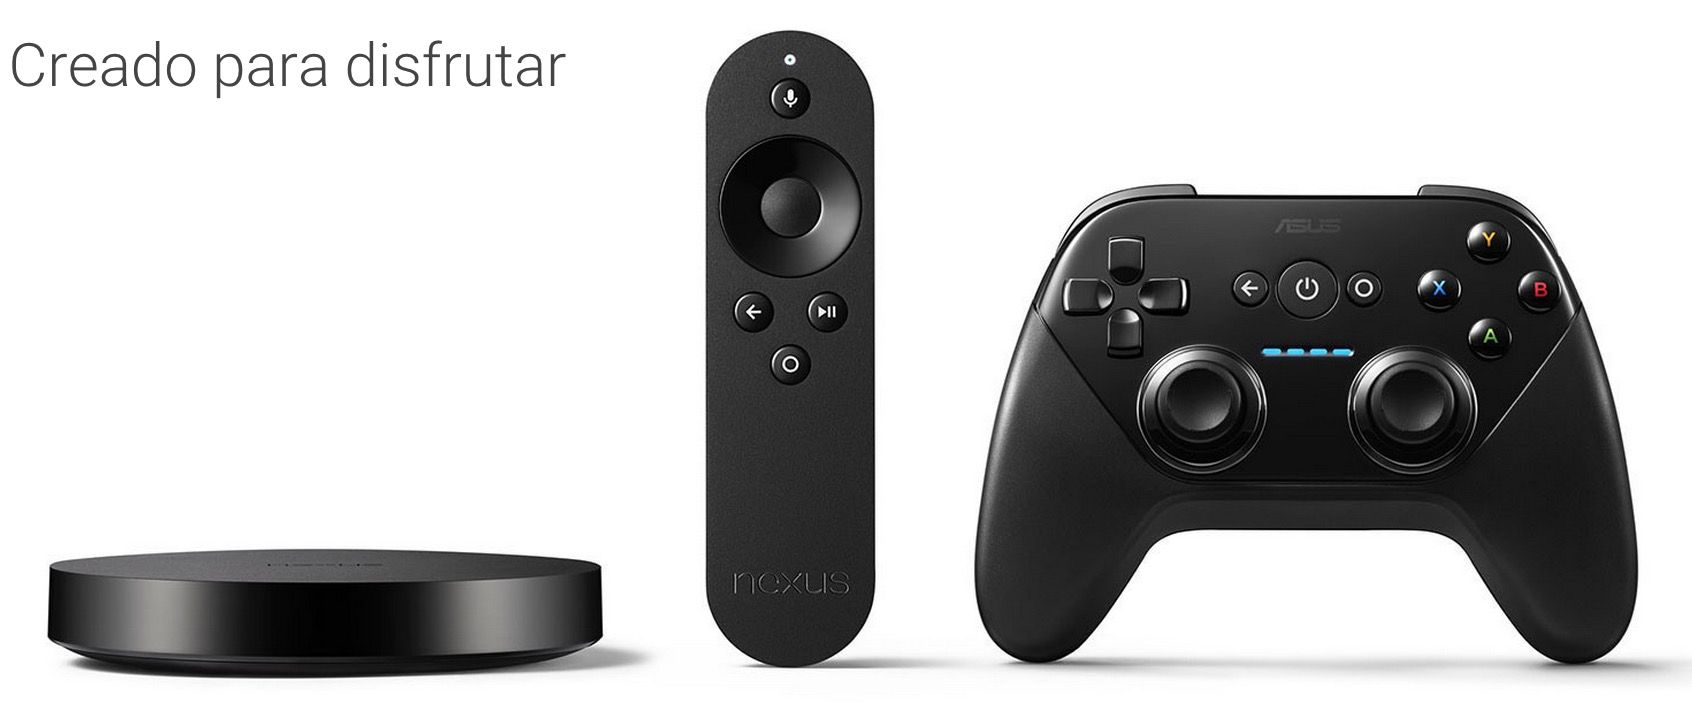 Pack completo Nexus Player